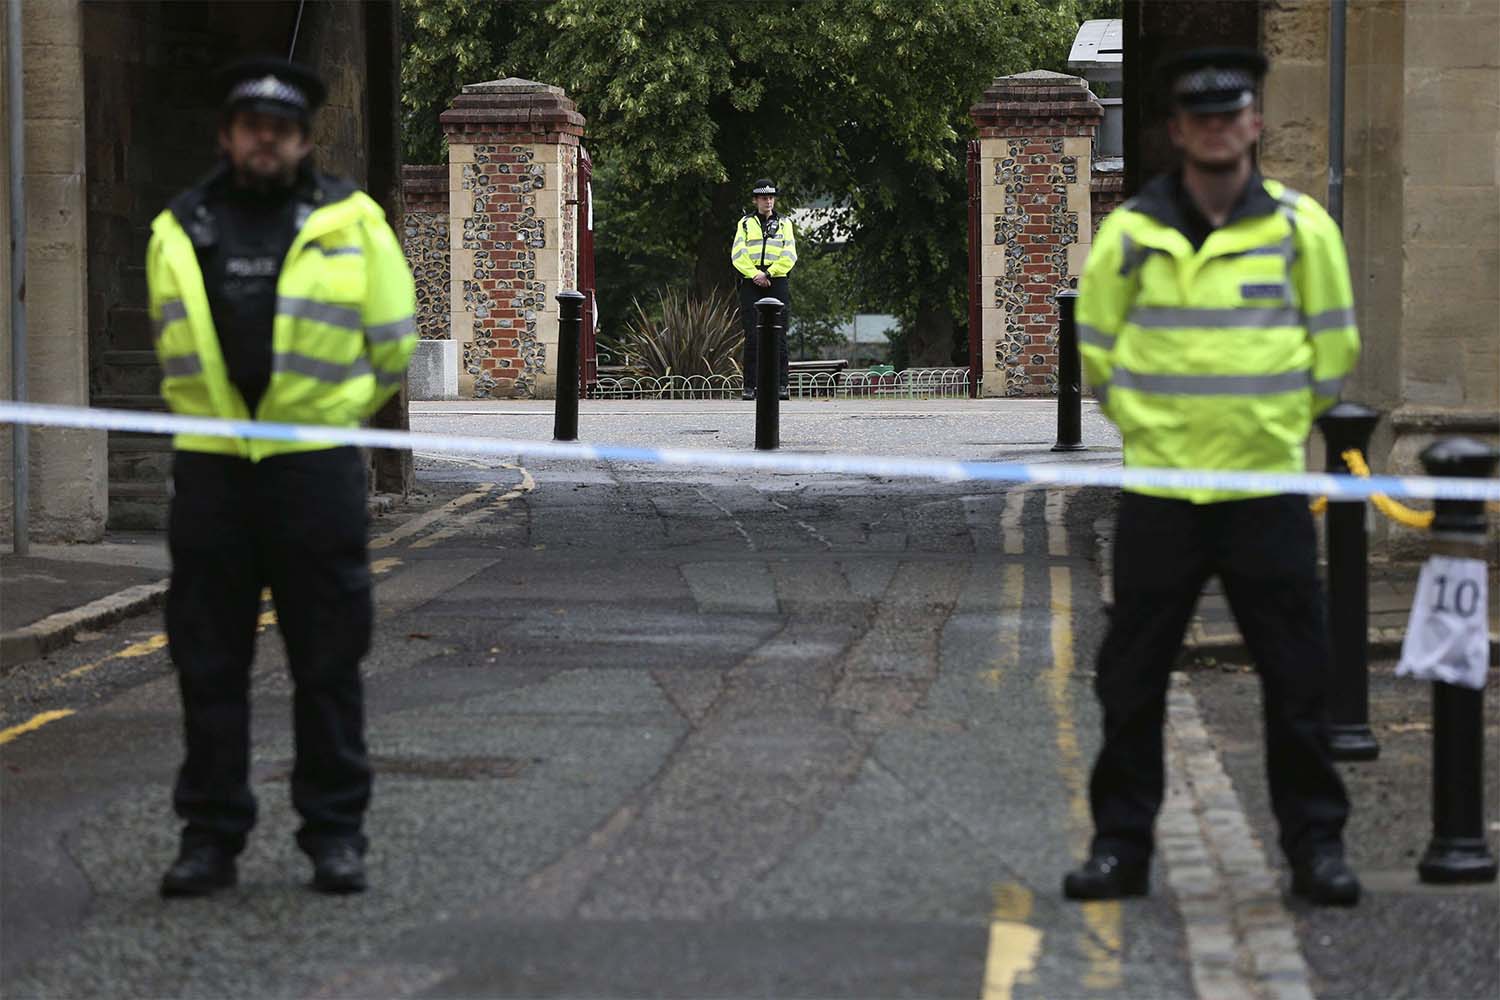 Police stand guard at the Abbey gateway of Forbury Gardens park in Reading town centre following Saturday's stabbing attack in the gardens